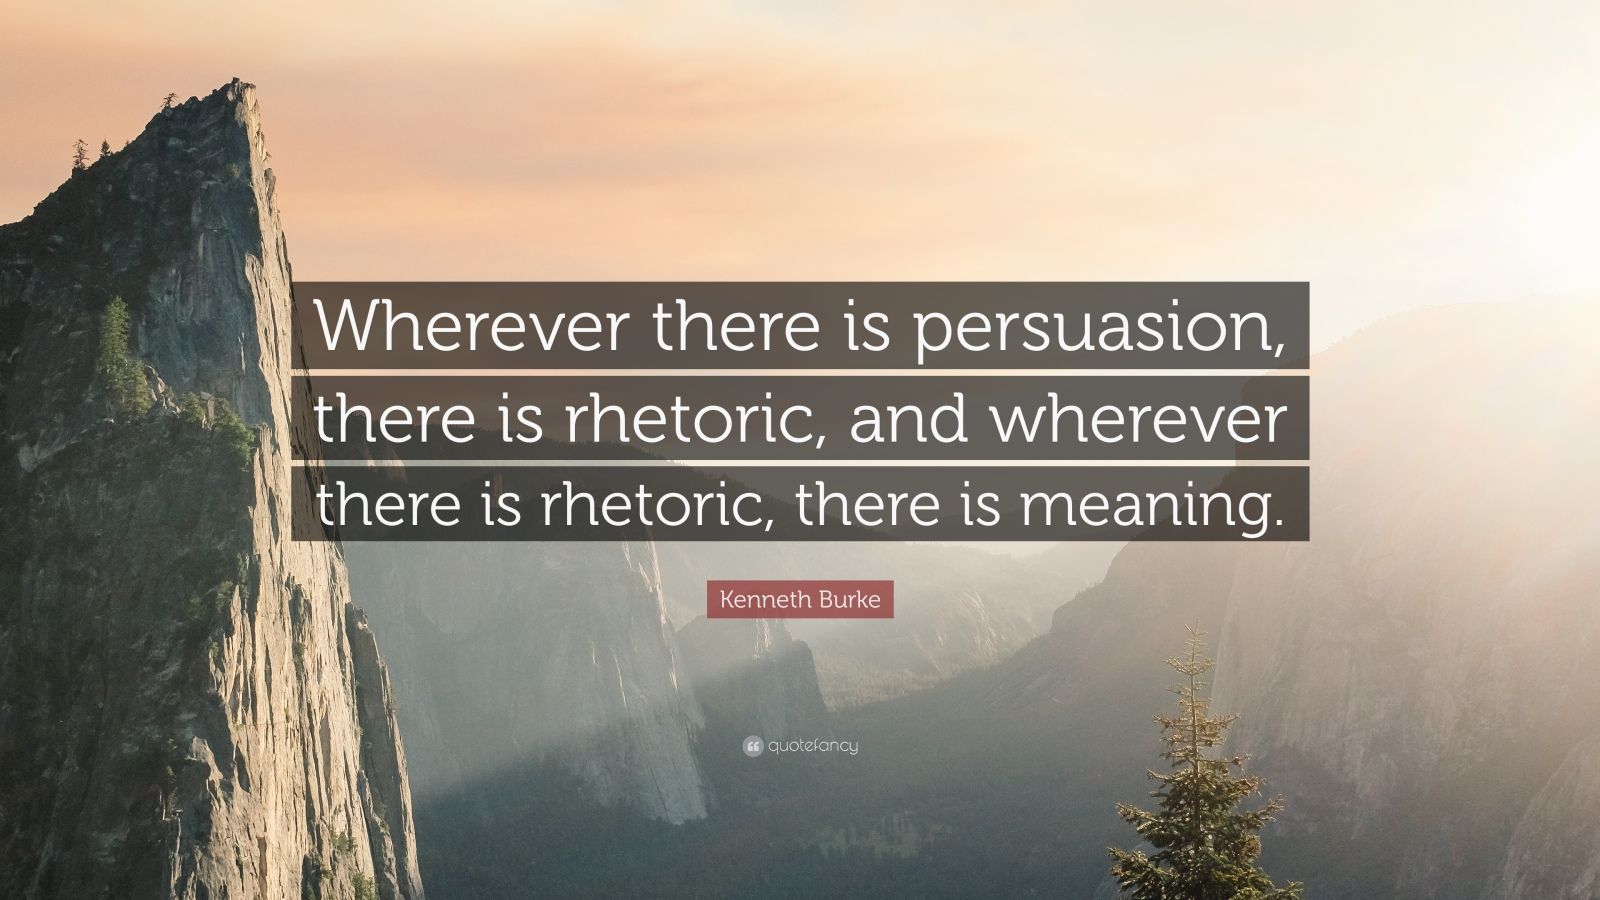 Kenneth Burke Quote: “Wherever there is persuasion, there is rhetoric